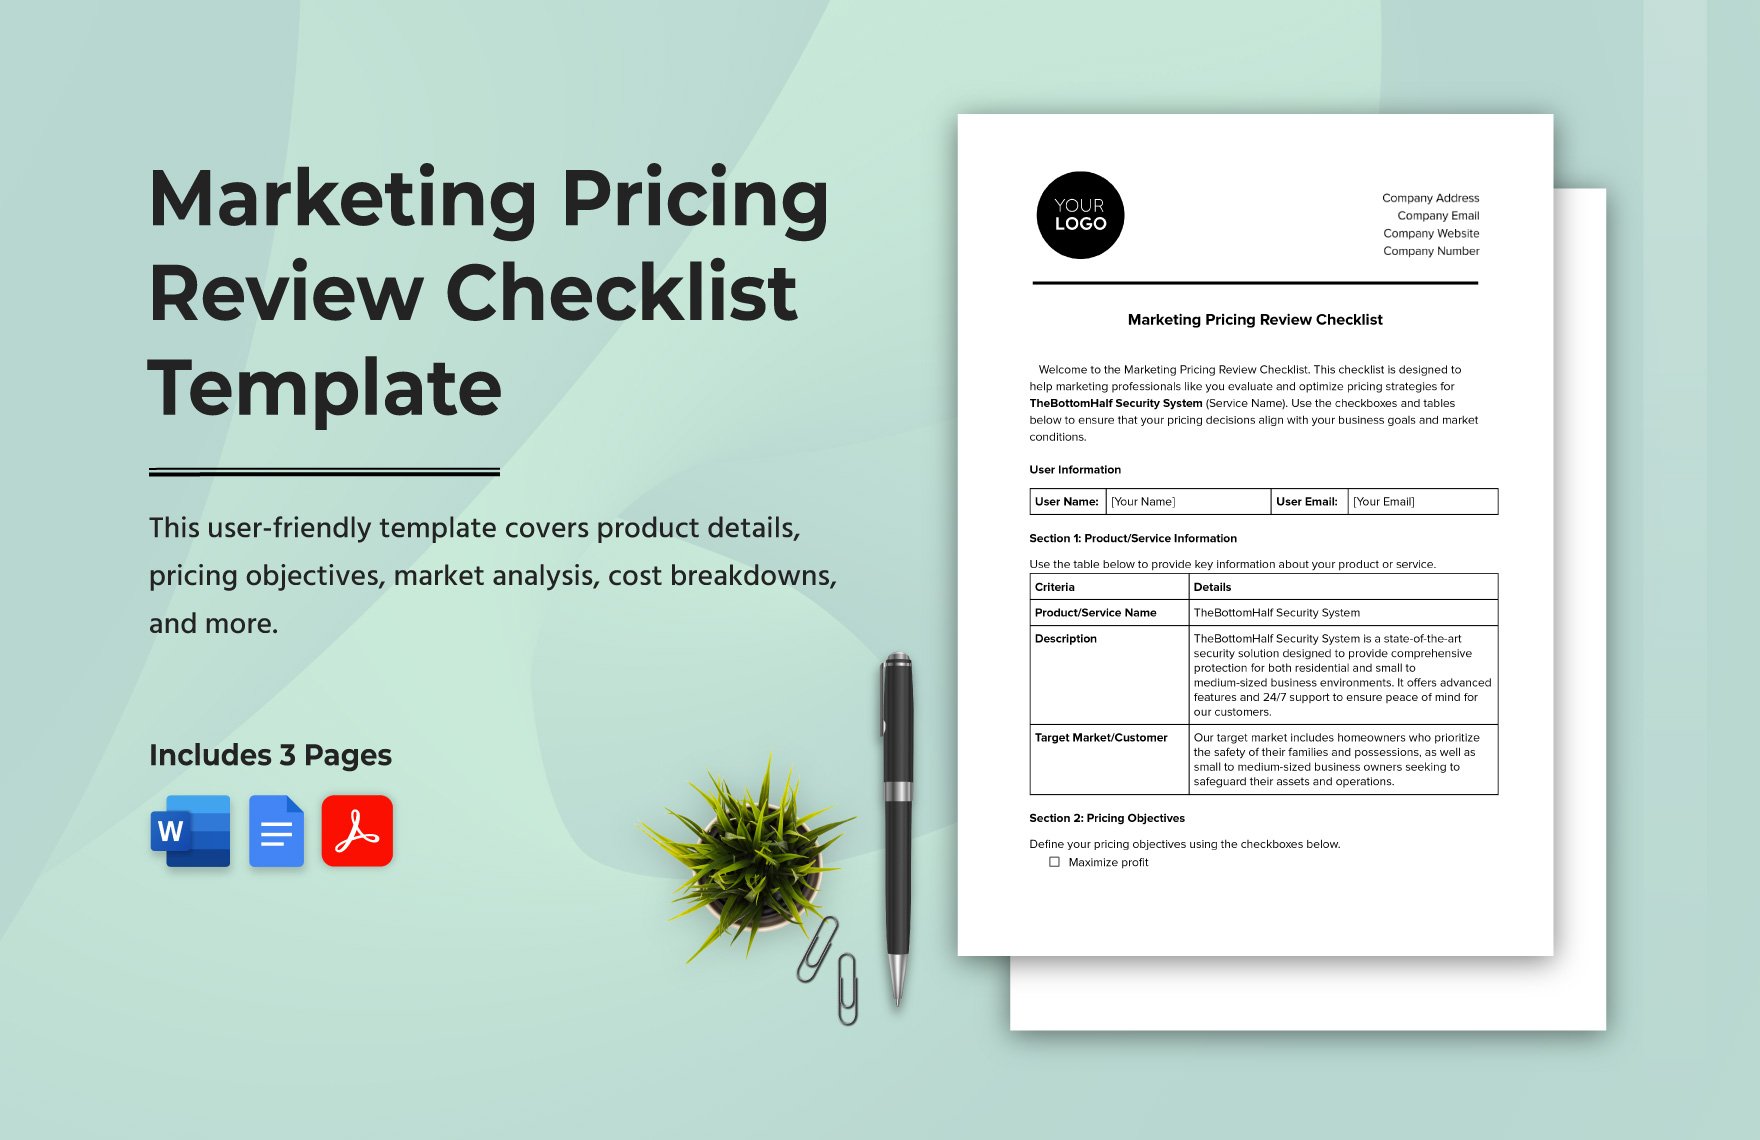 Marketing Pricing Review Checklist Template